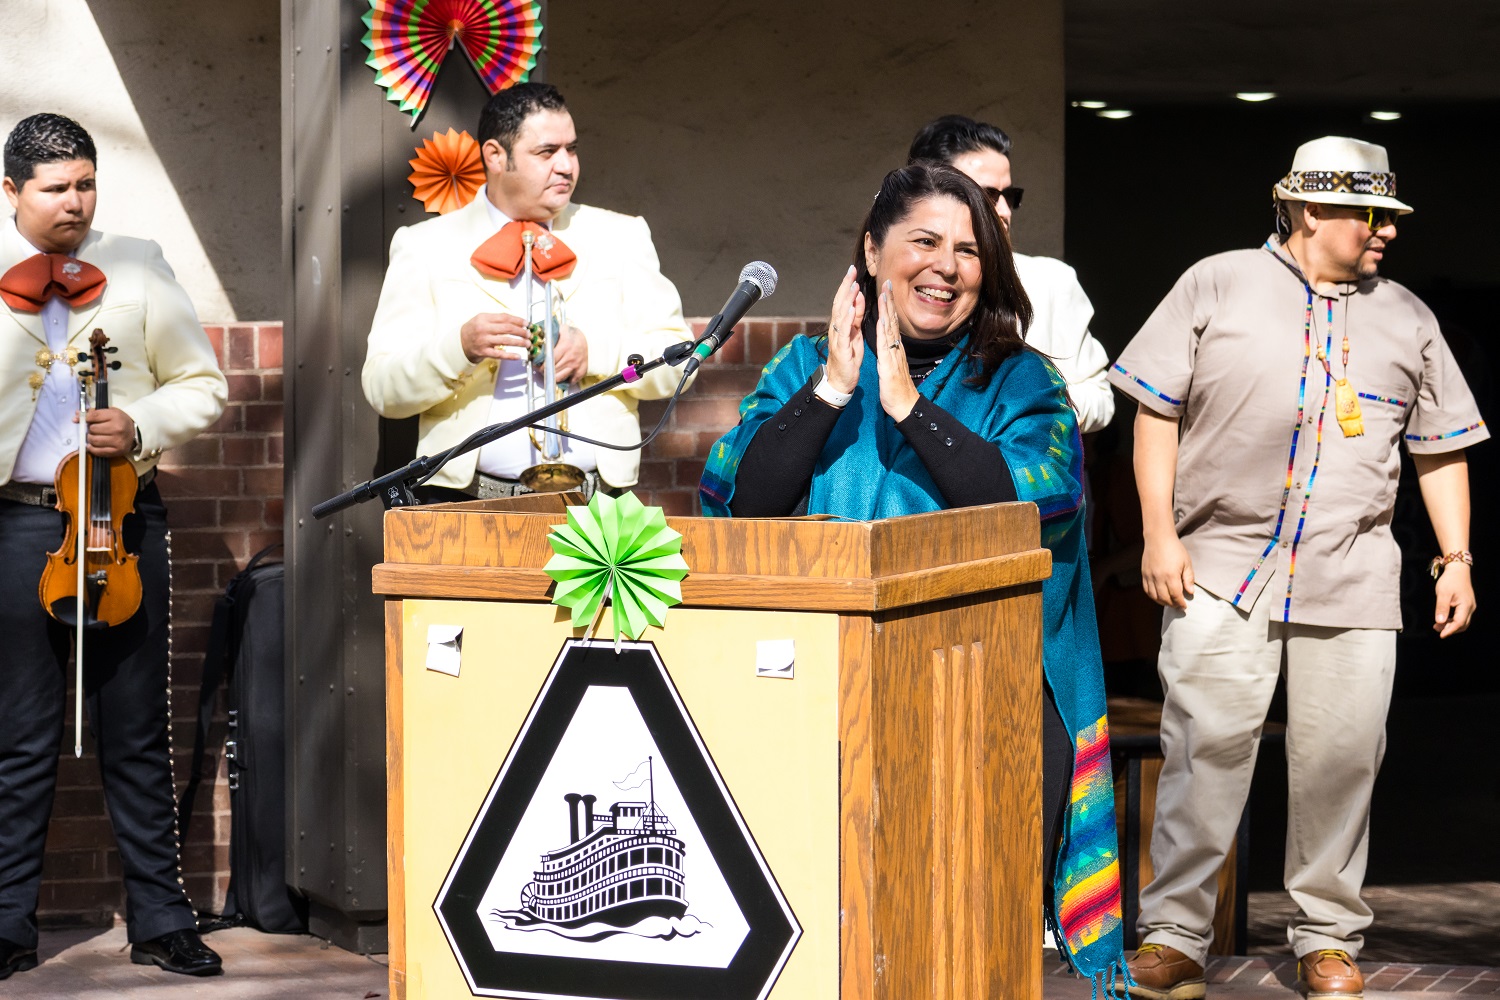 Dr. Lisa Aguilera Lawrenson formally dedicates the Campesino, Tony Fitch and Dawn Mabalon forums.